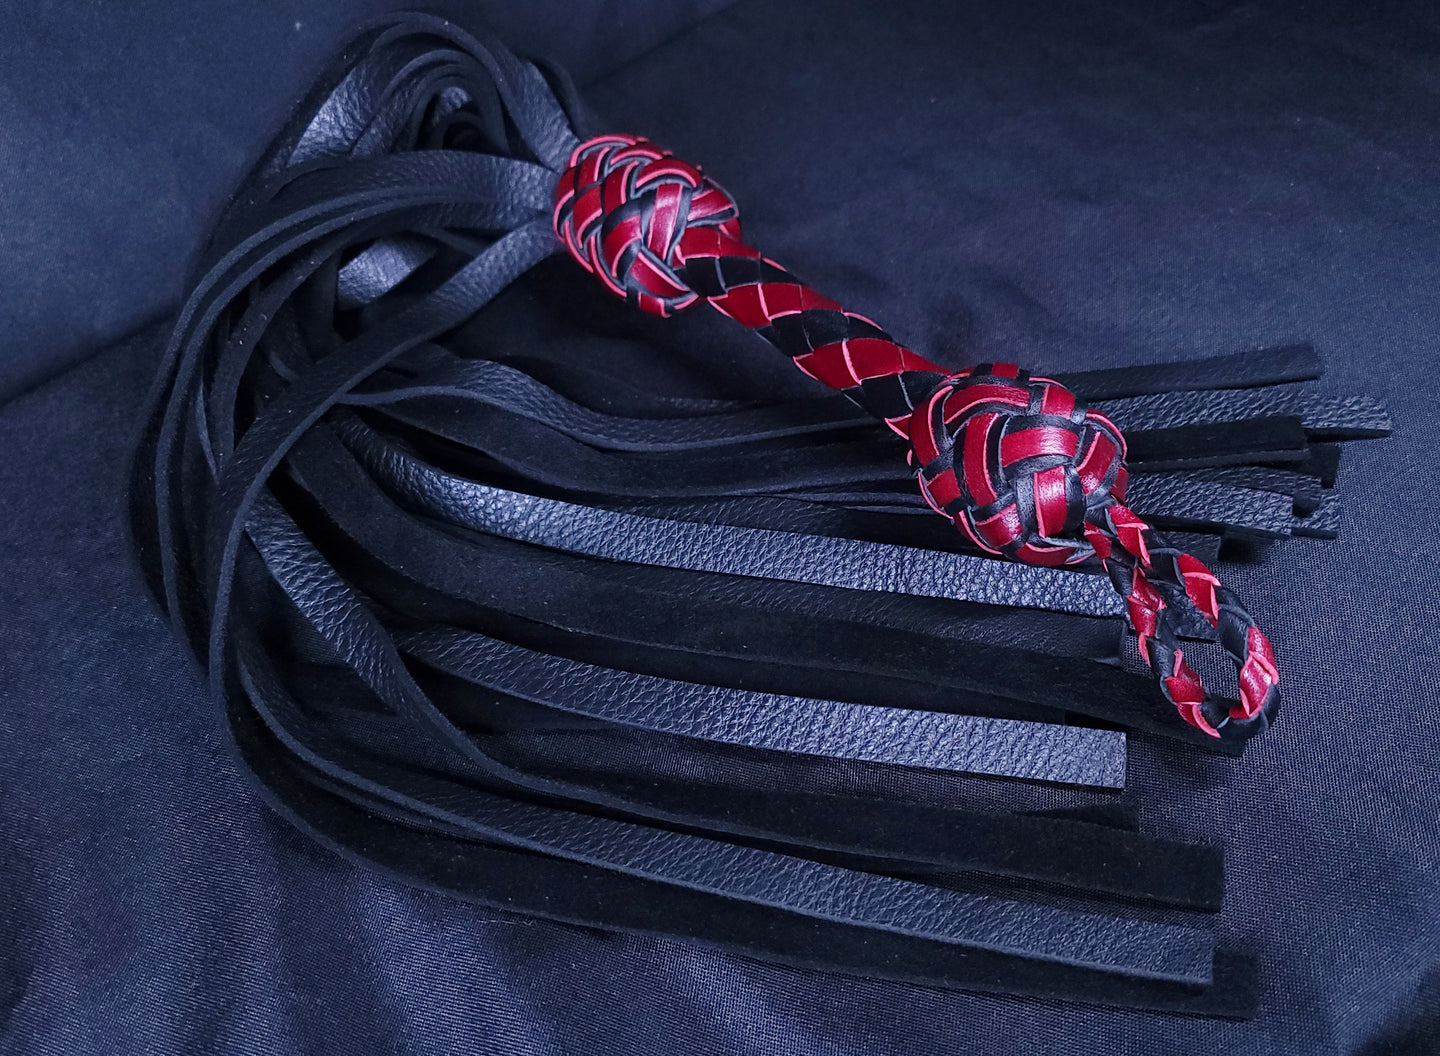 Black and Red Moose Floggers- In stock